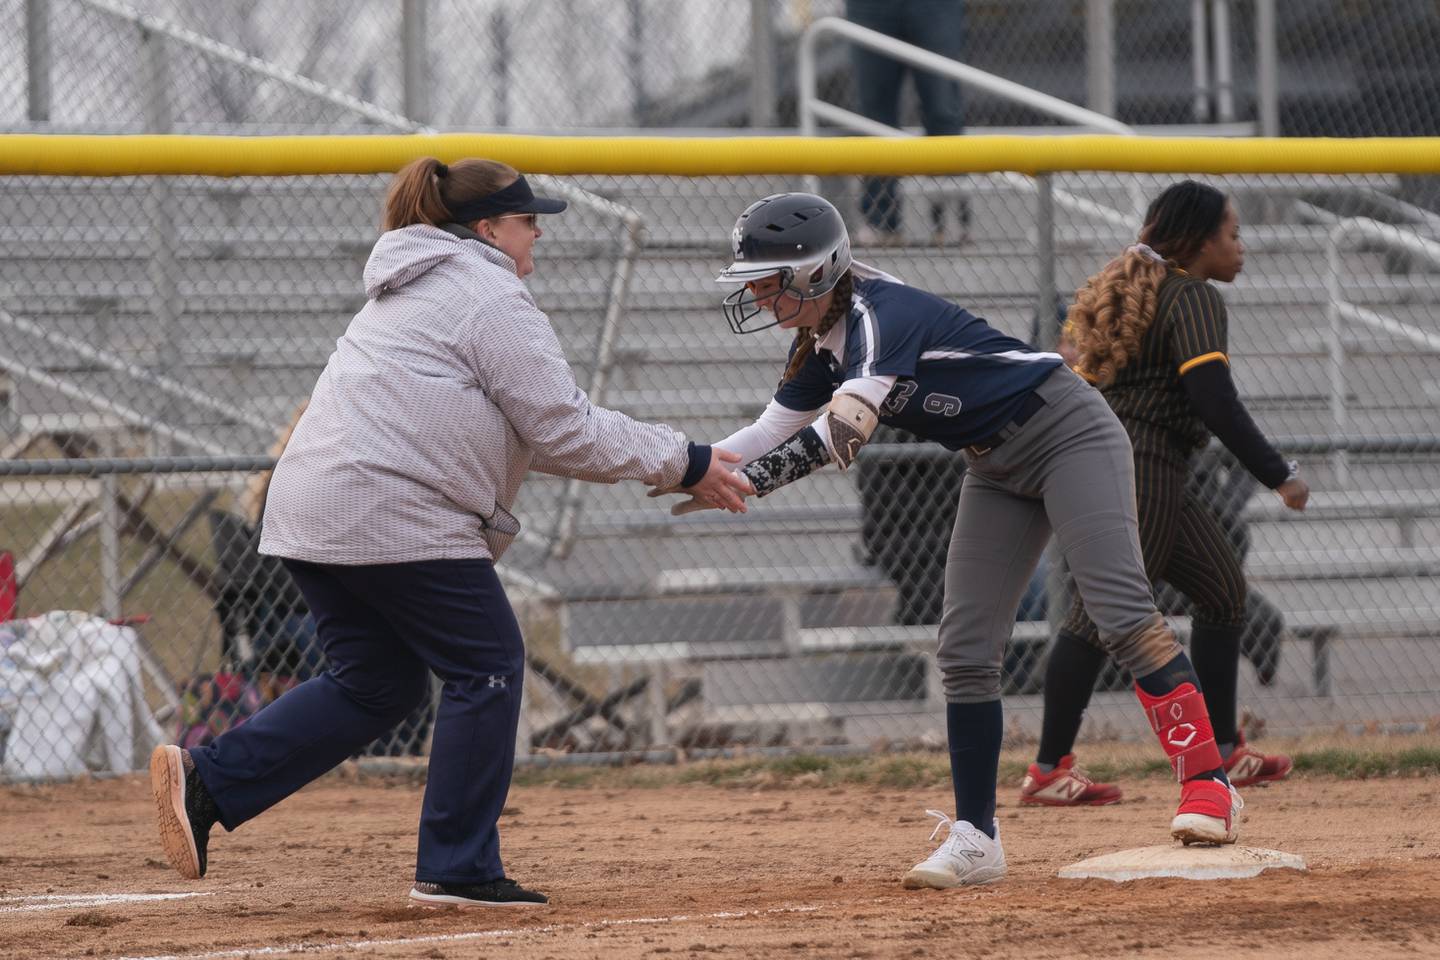 Oswego East's head coach Sarah Davies-Dymanus reacts after Kenzie Gatz (9) reaches third base on a triple against Metea Valley during a softball game at Metea Valley High School in Aurora on Friday, Mar 24, 2023.